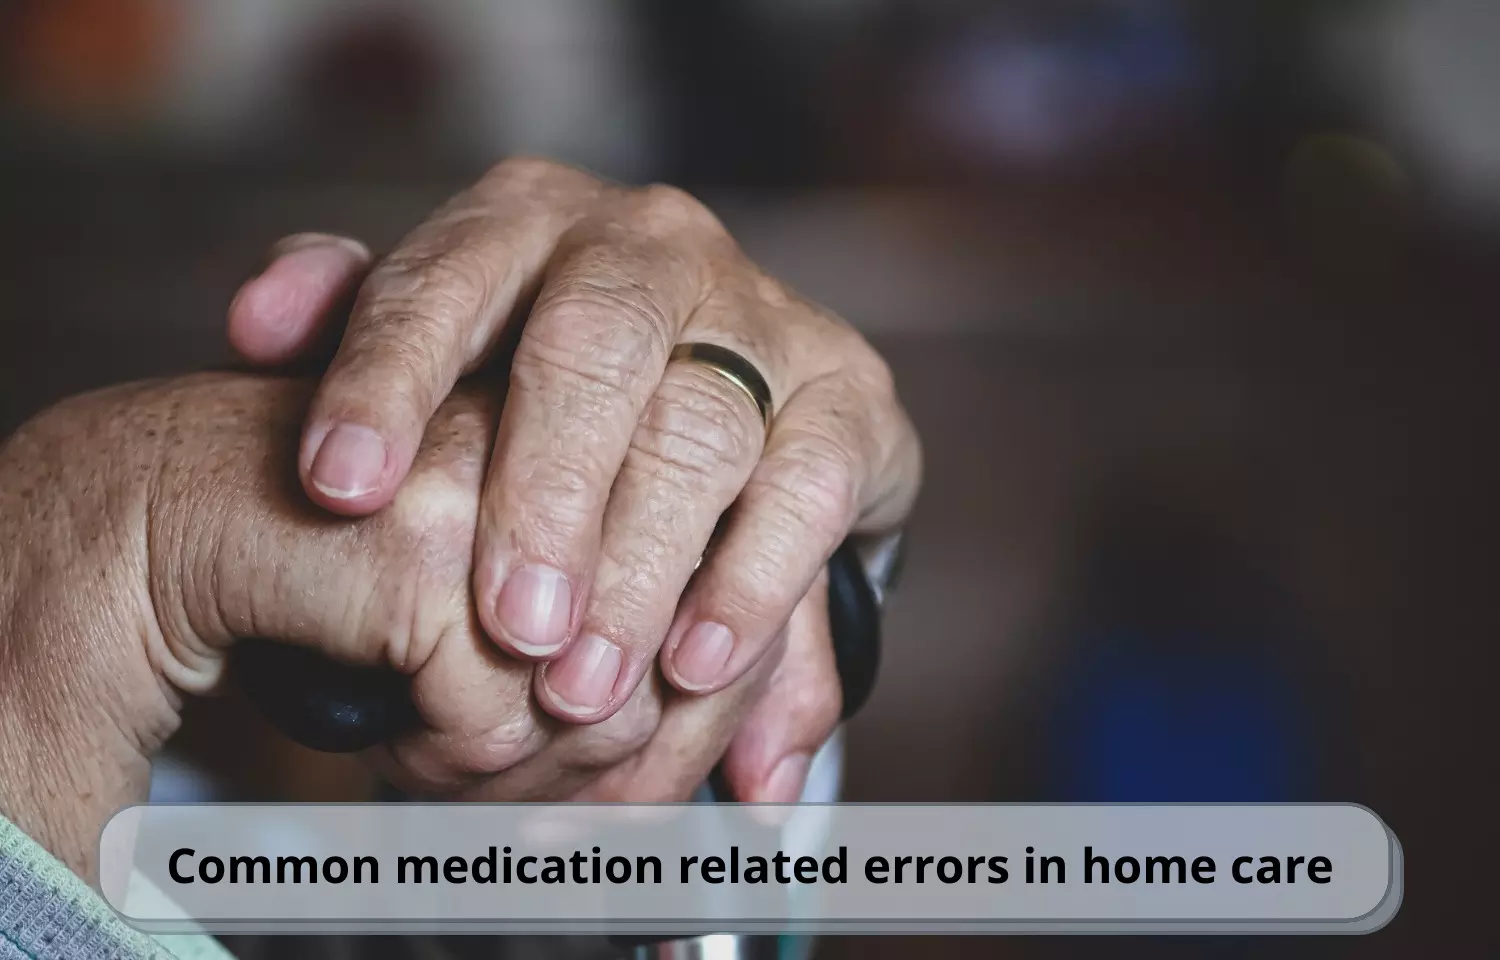 Journal Club - Common medication related errors in home care